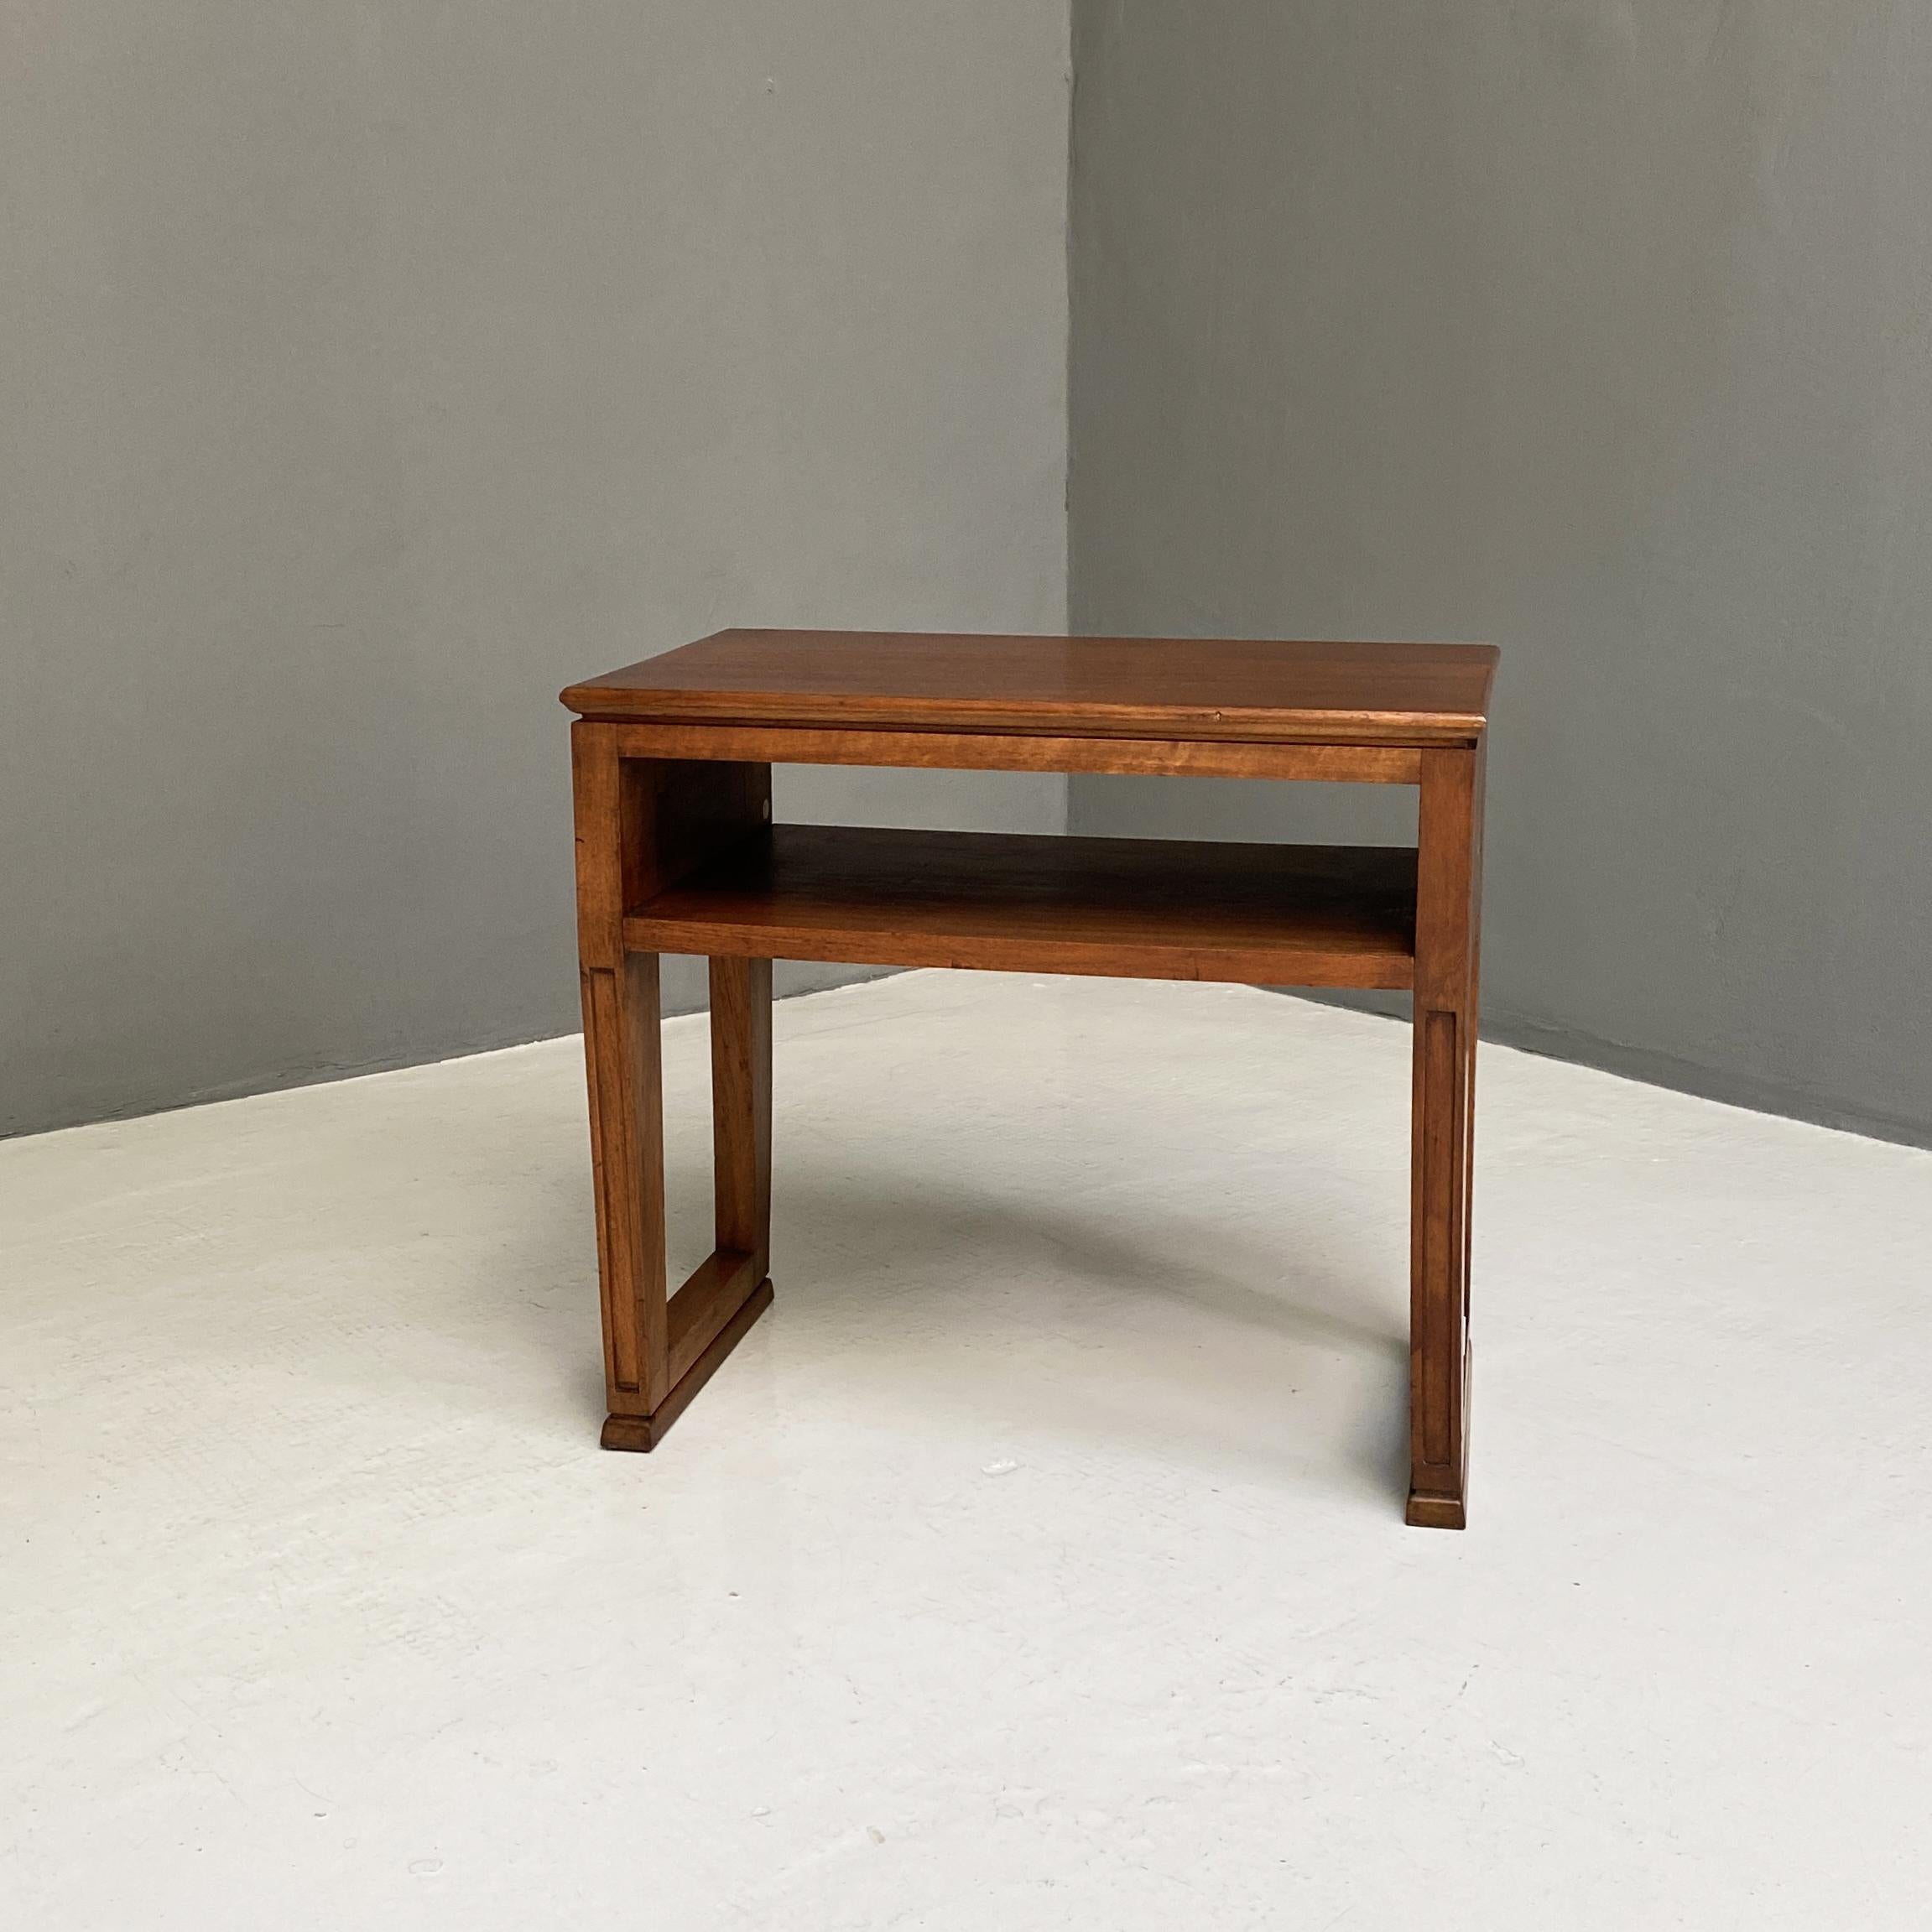 Mid-20th Century Italian Mid-Century Modern Solid Wood Coffee Table with Double Shelf, 1960s For Sale